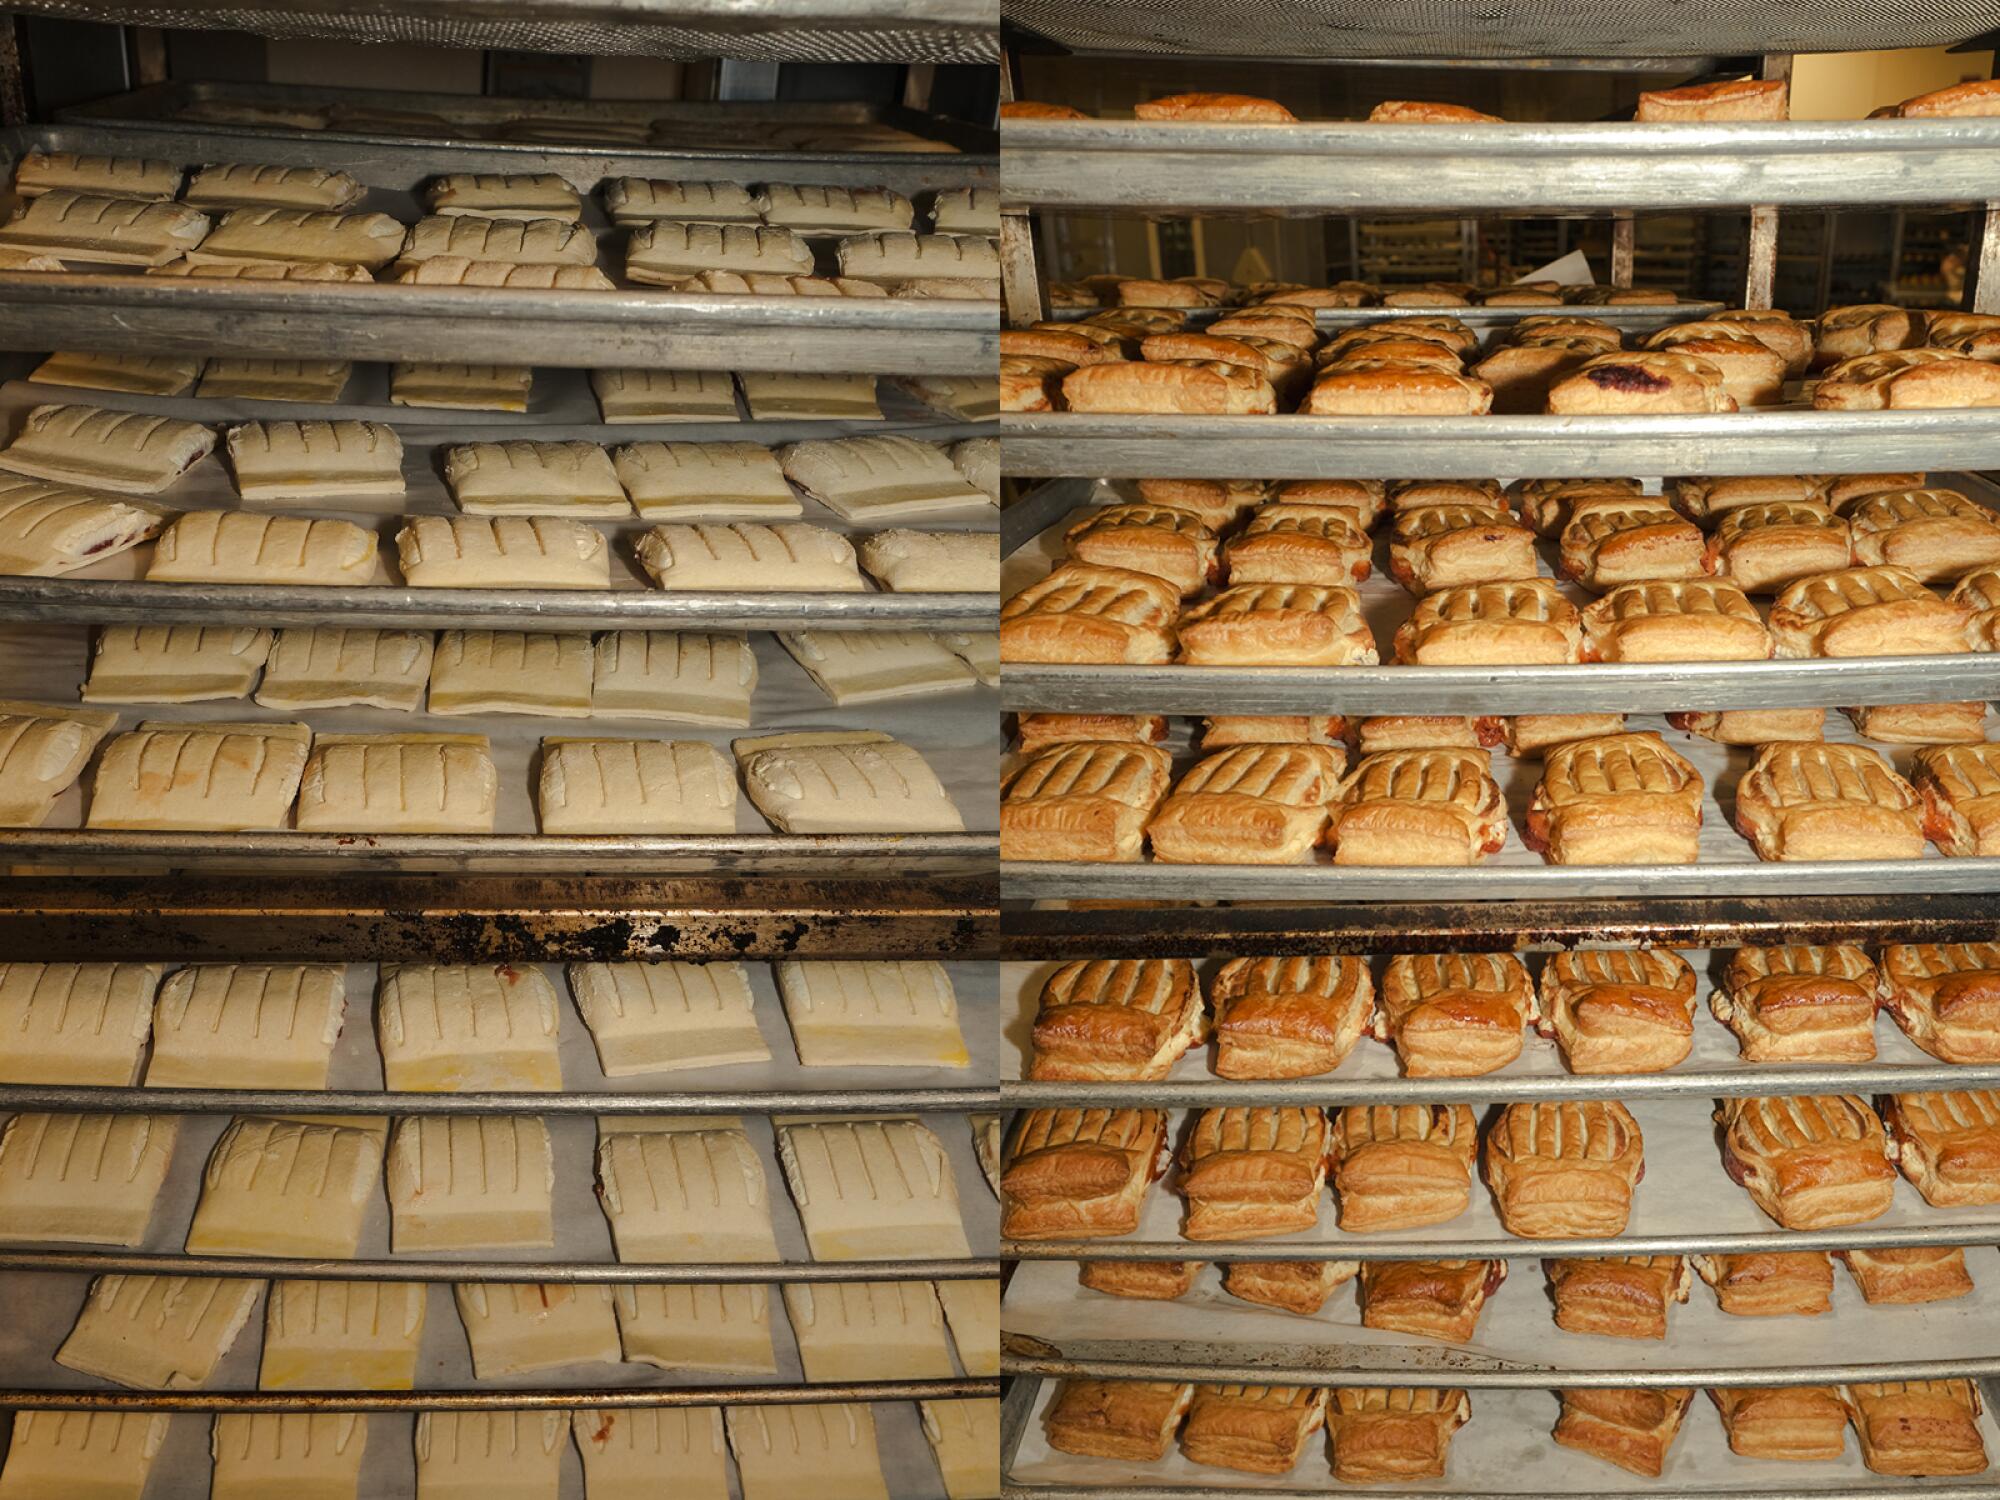 Before and after of baked pastries at Porto's Bakery.